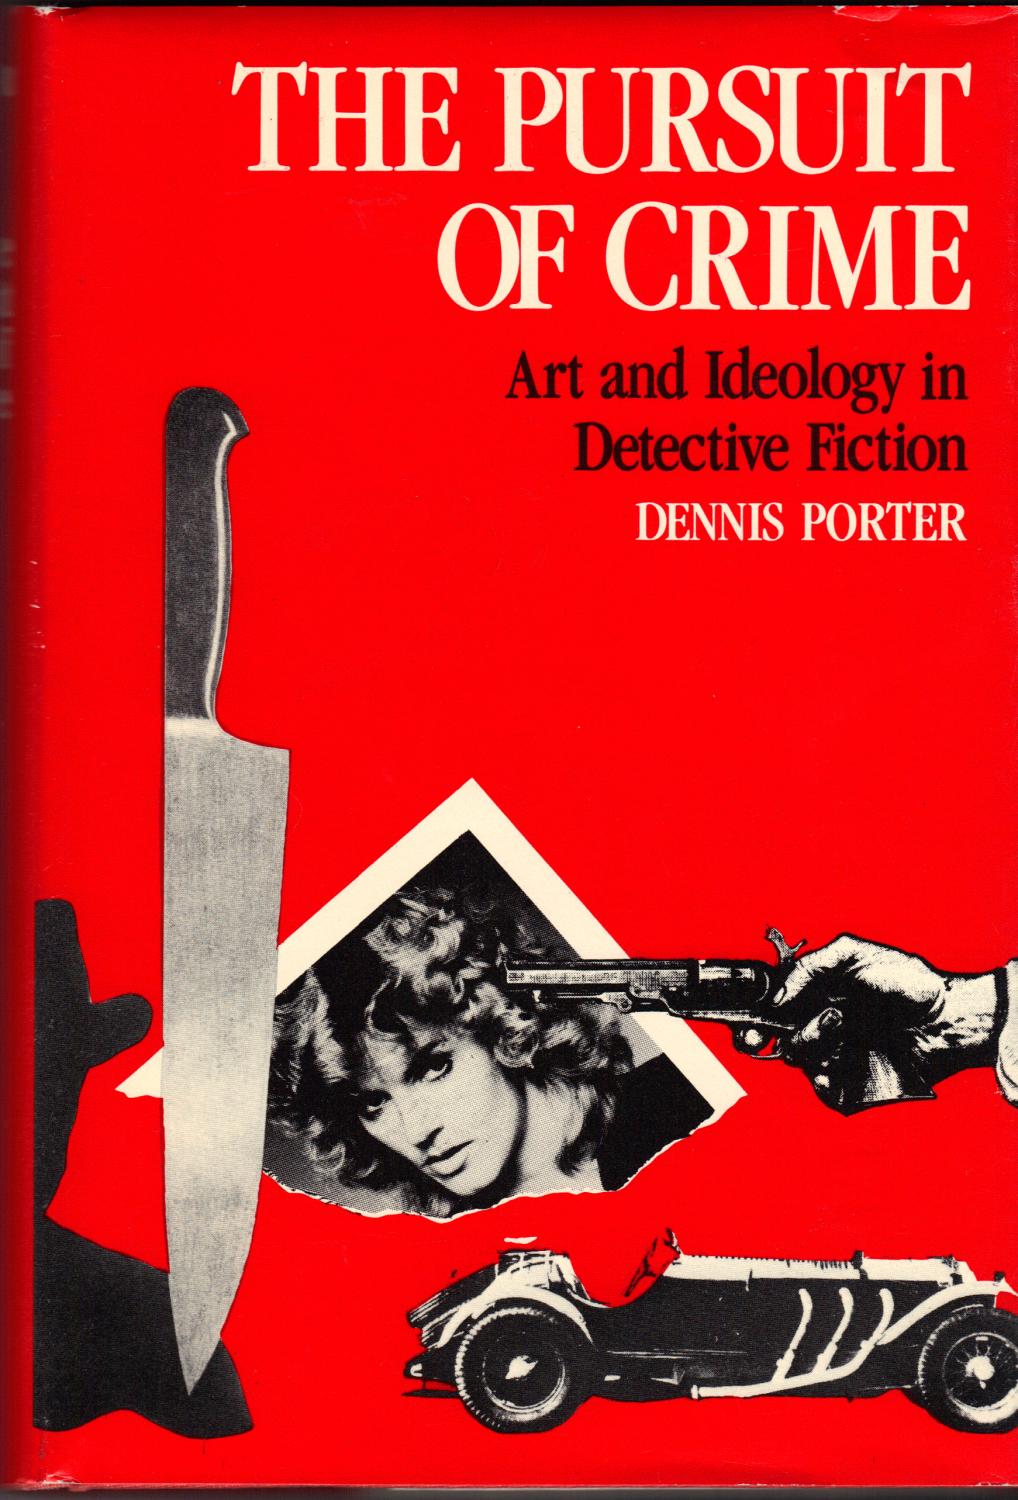 THE PURSUIT OF CRIME ~Art and Ideology in Detective Fiction by PORTER ...